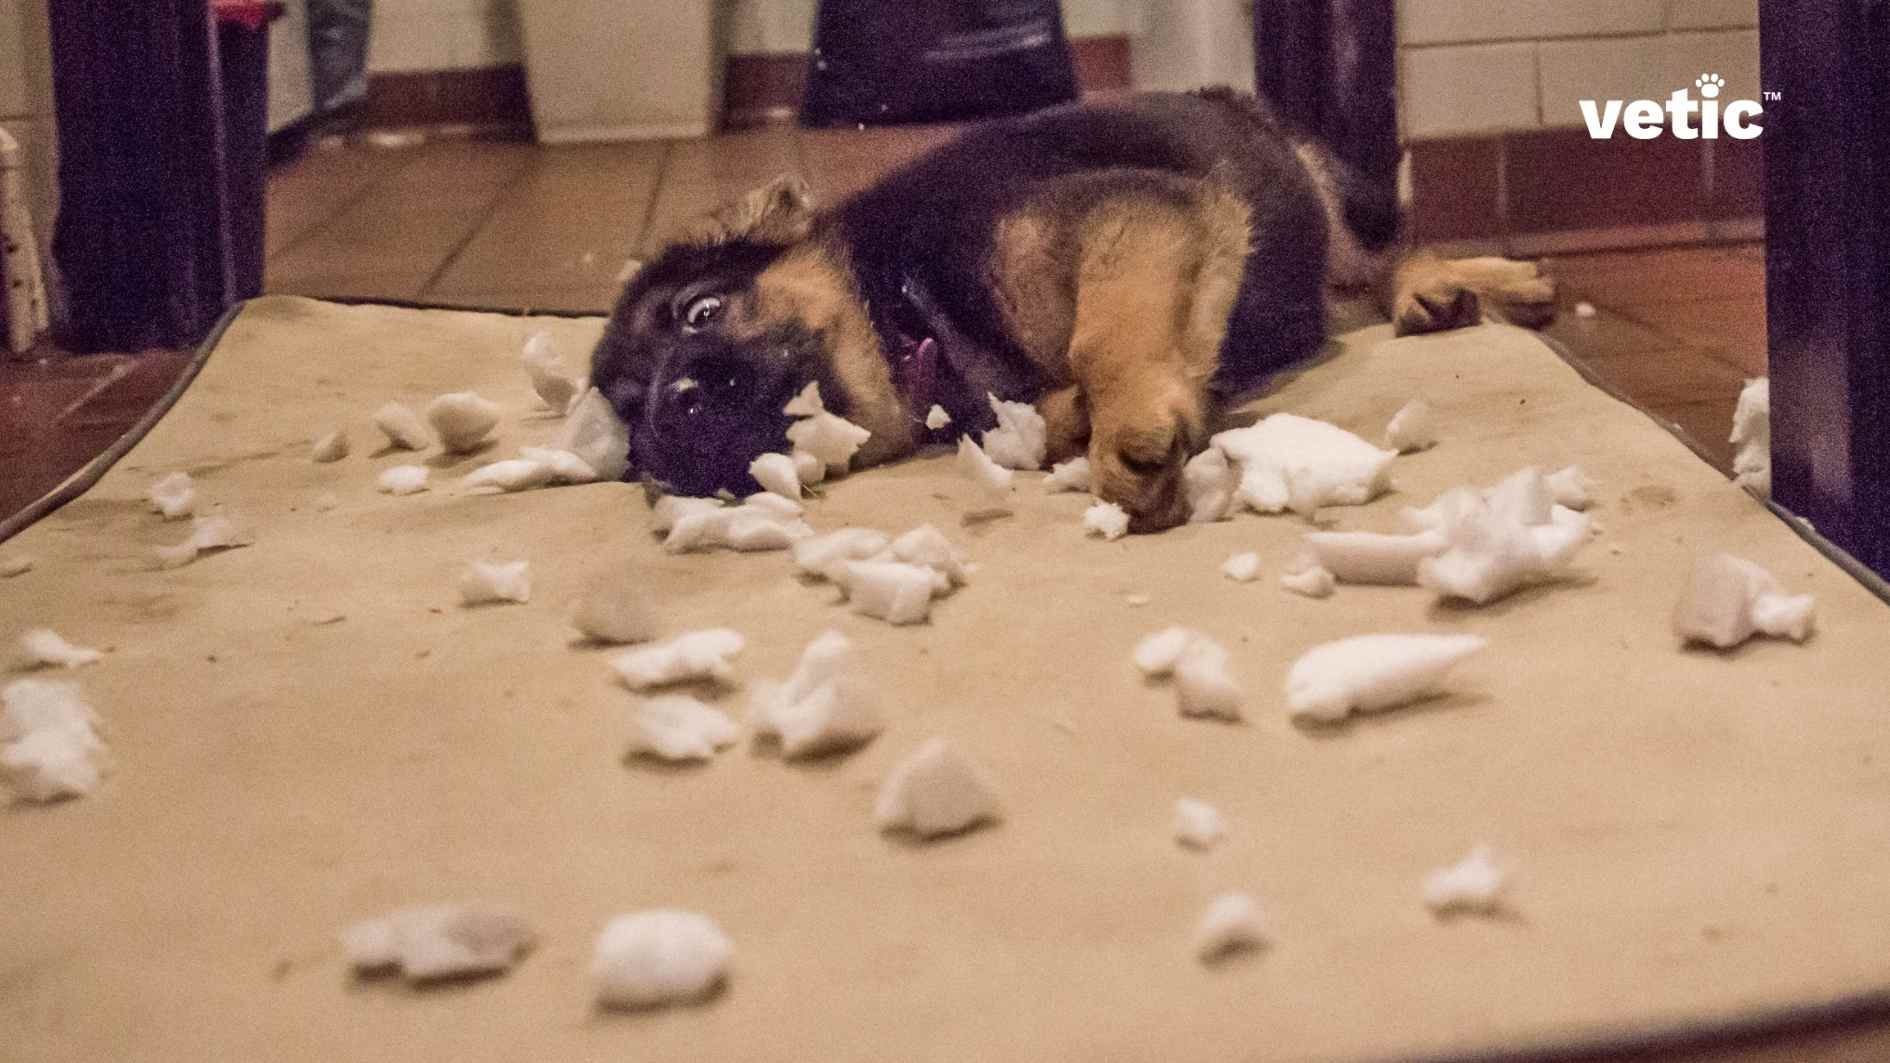 German Shepherd and Belgian Malinois puppies require a lot of training, mental stimulation and the right amount of exercise. The image with Vetic branding shows a German Shepherd puppy laying on a foam mattress with bits of torn foam all around the puppy which he has presumably torn.